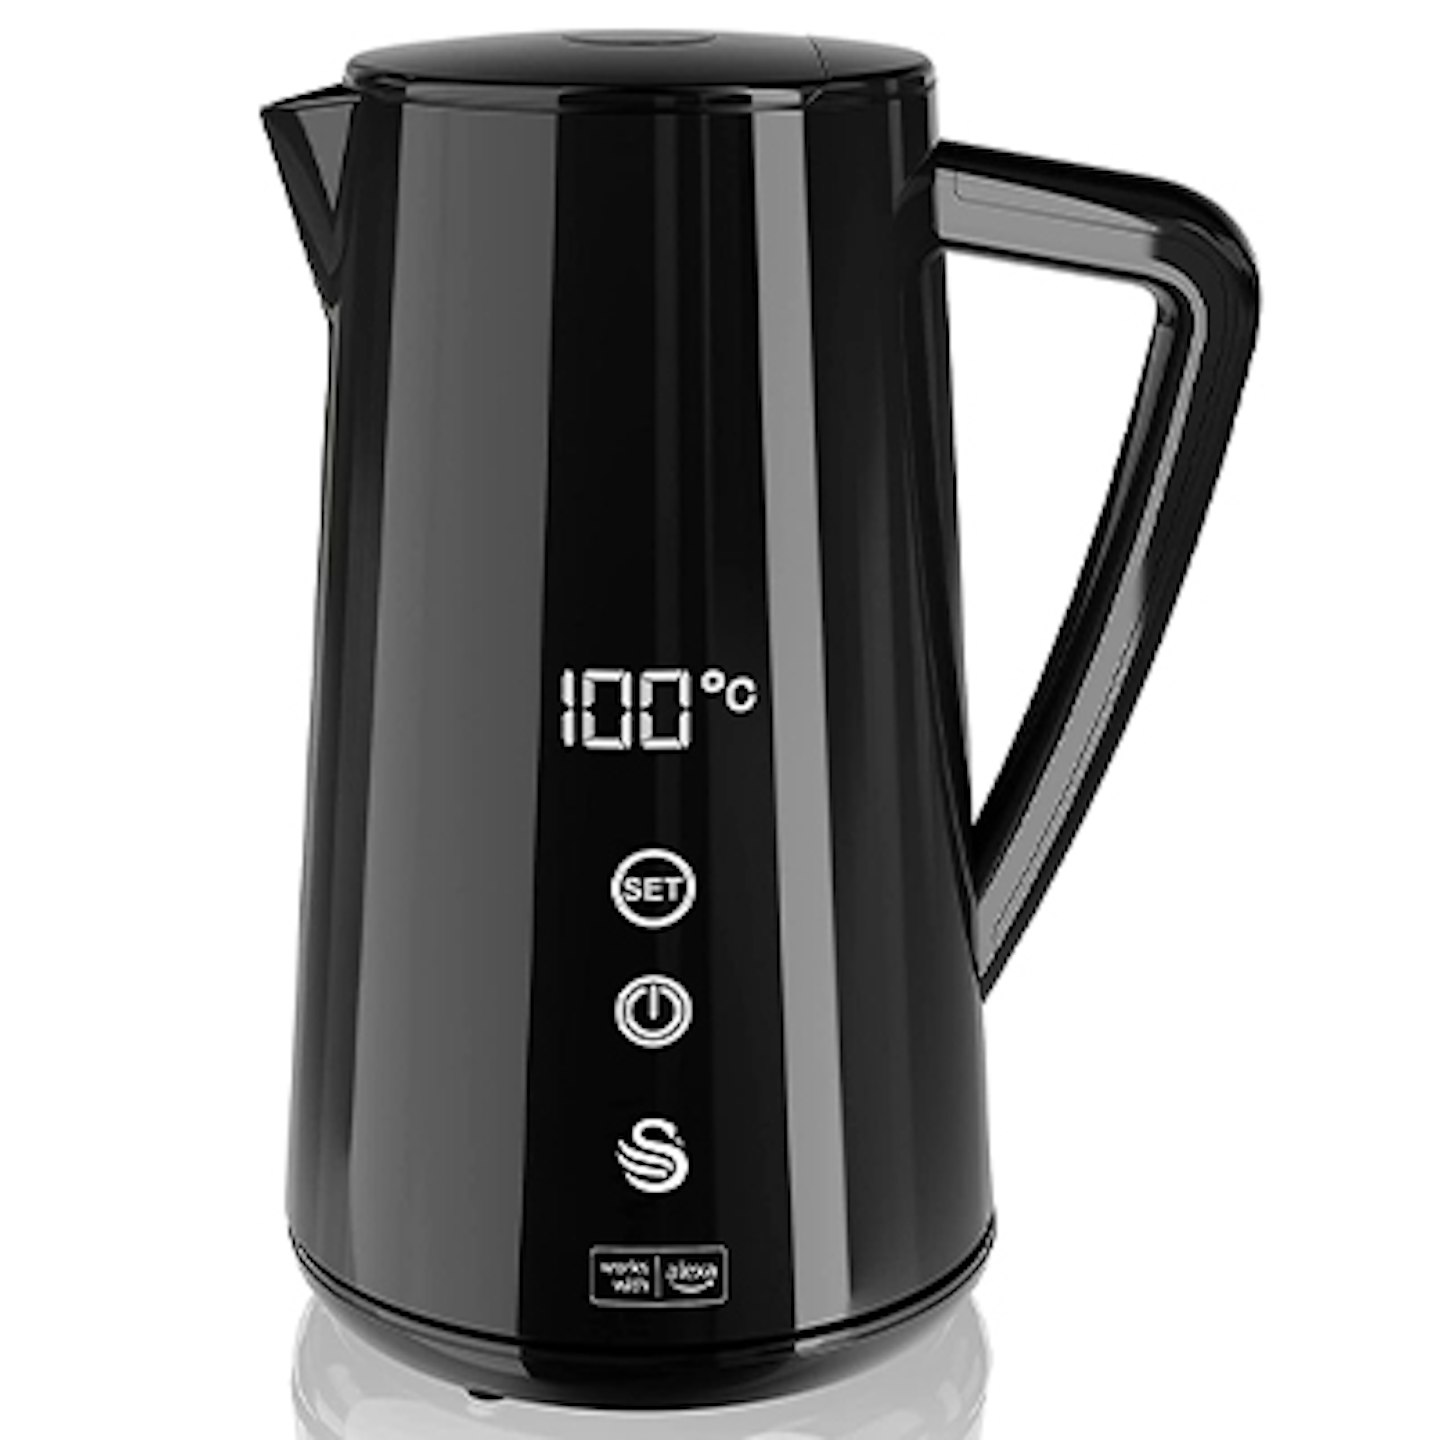 WiFi kettle allows you to boil water from bed